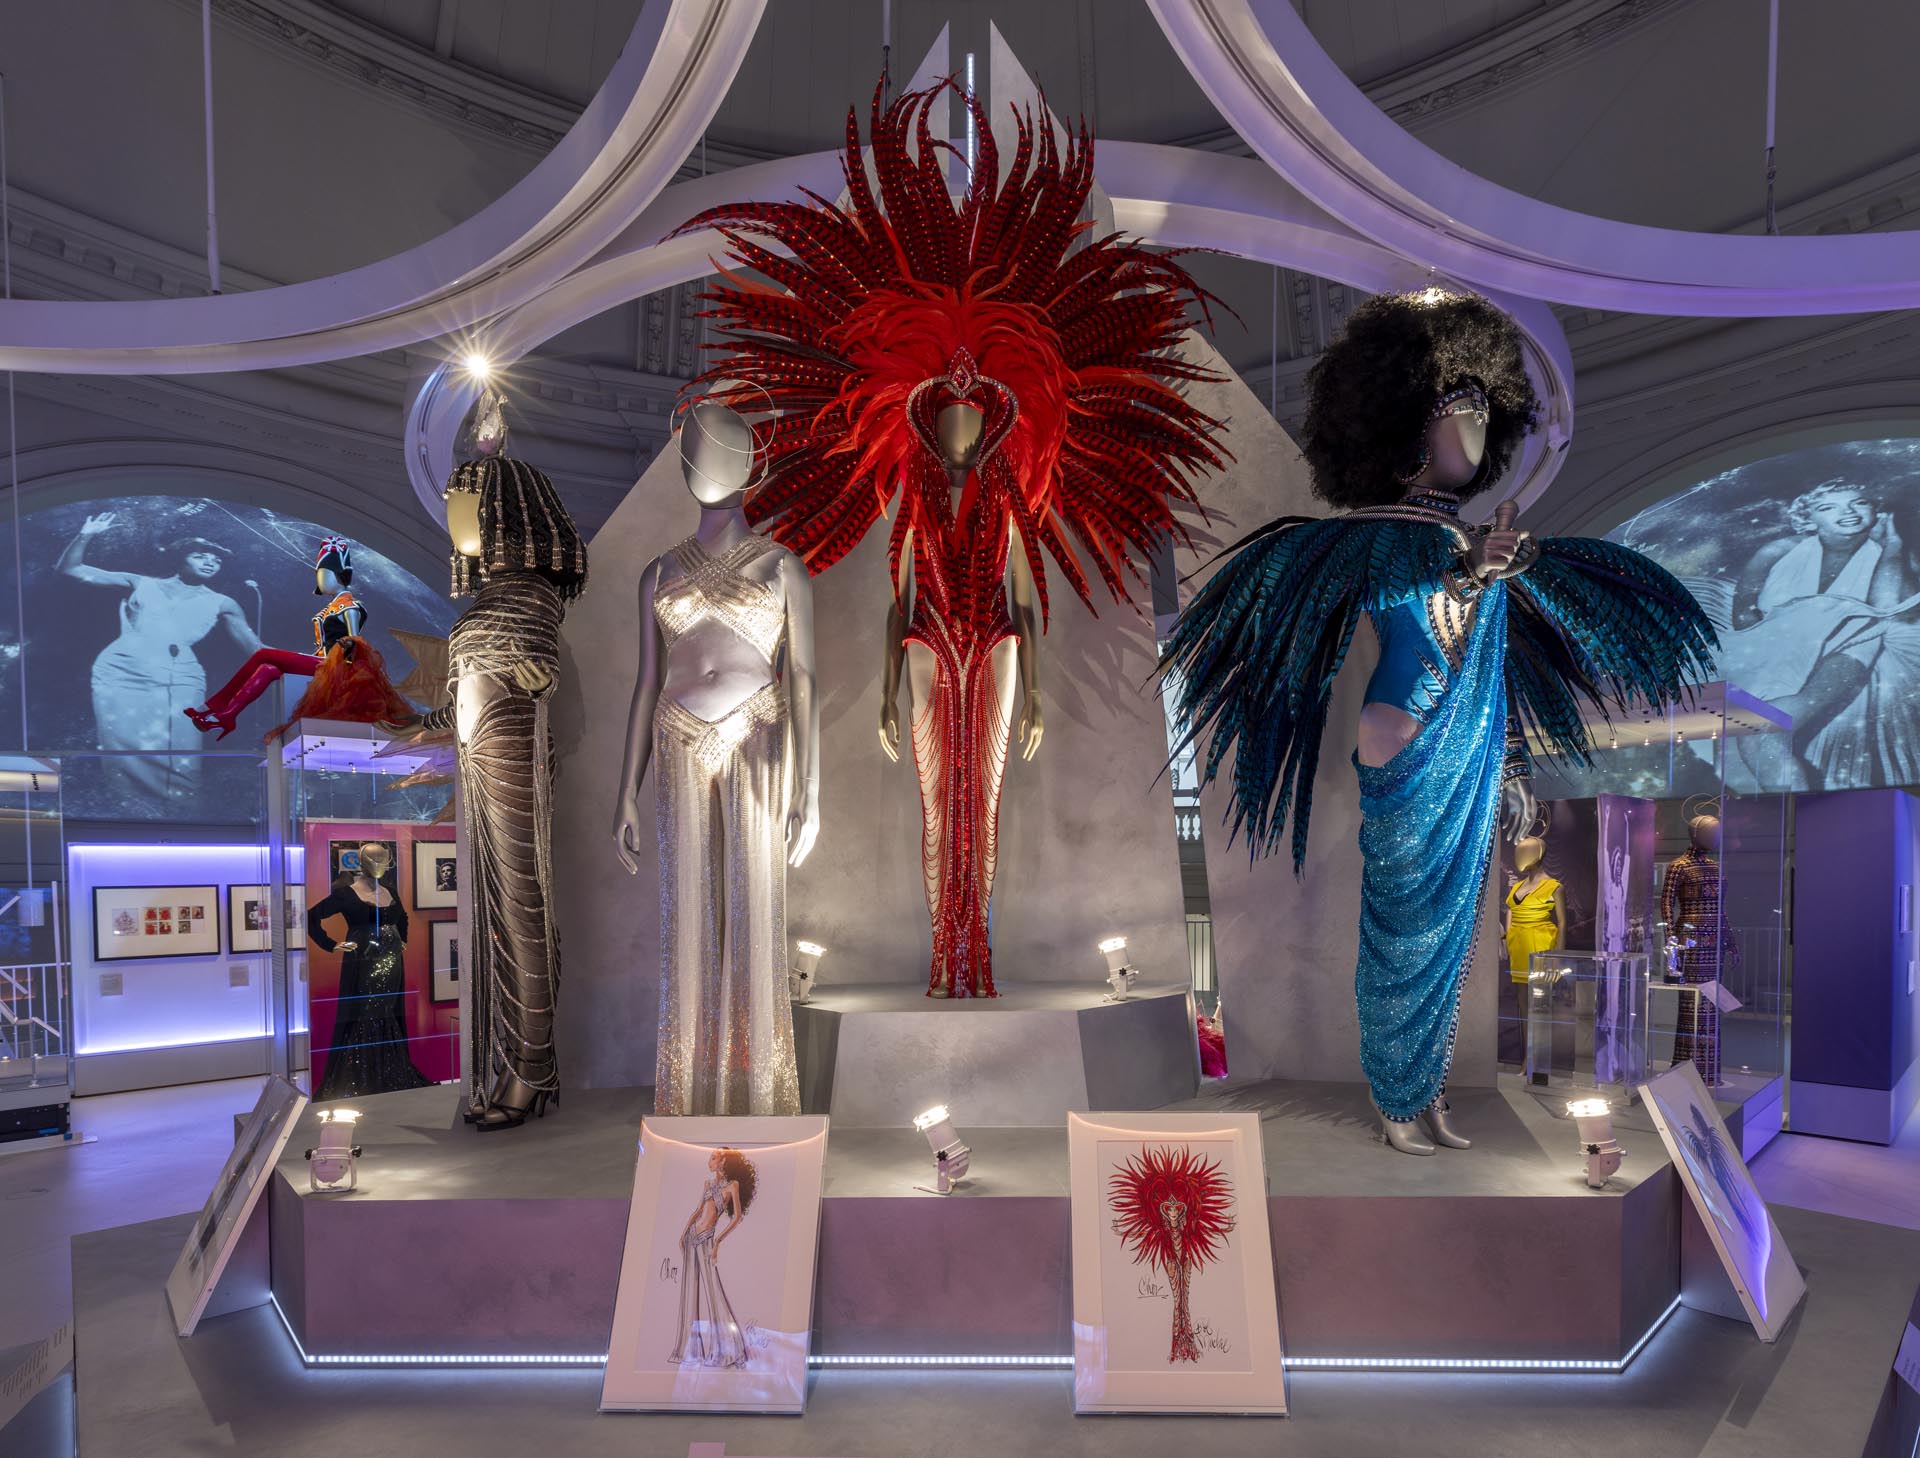 A feast of costumes fills the V&A's Diva exhibition